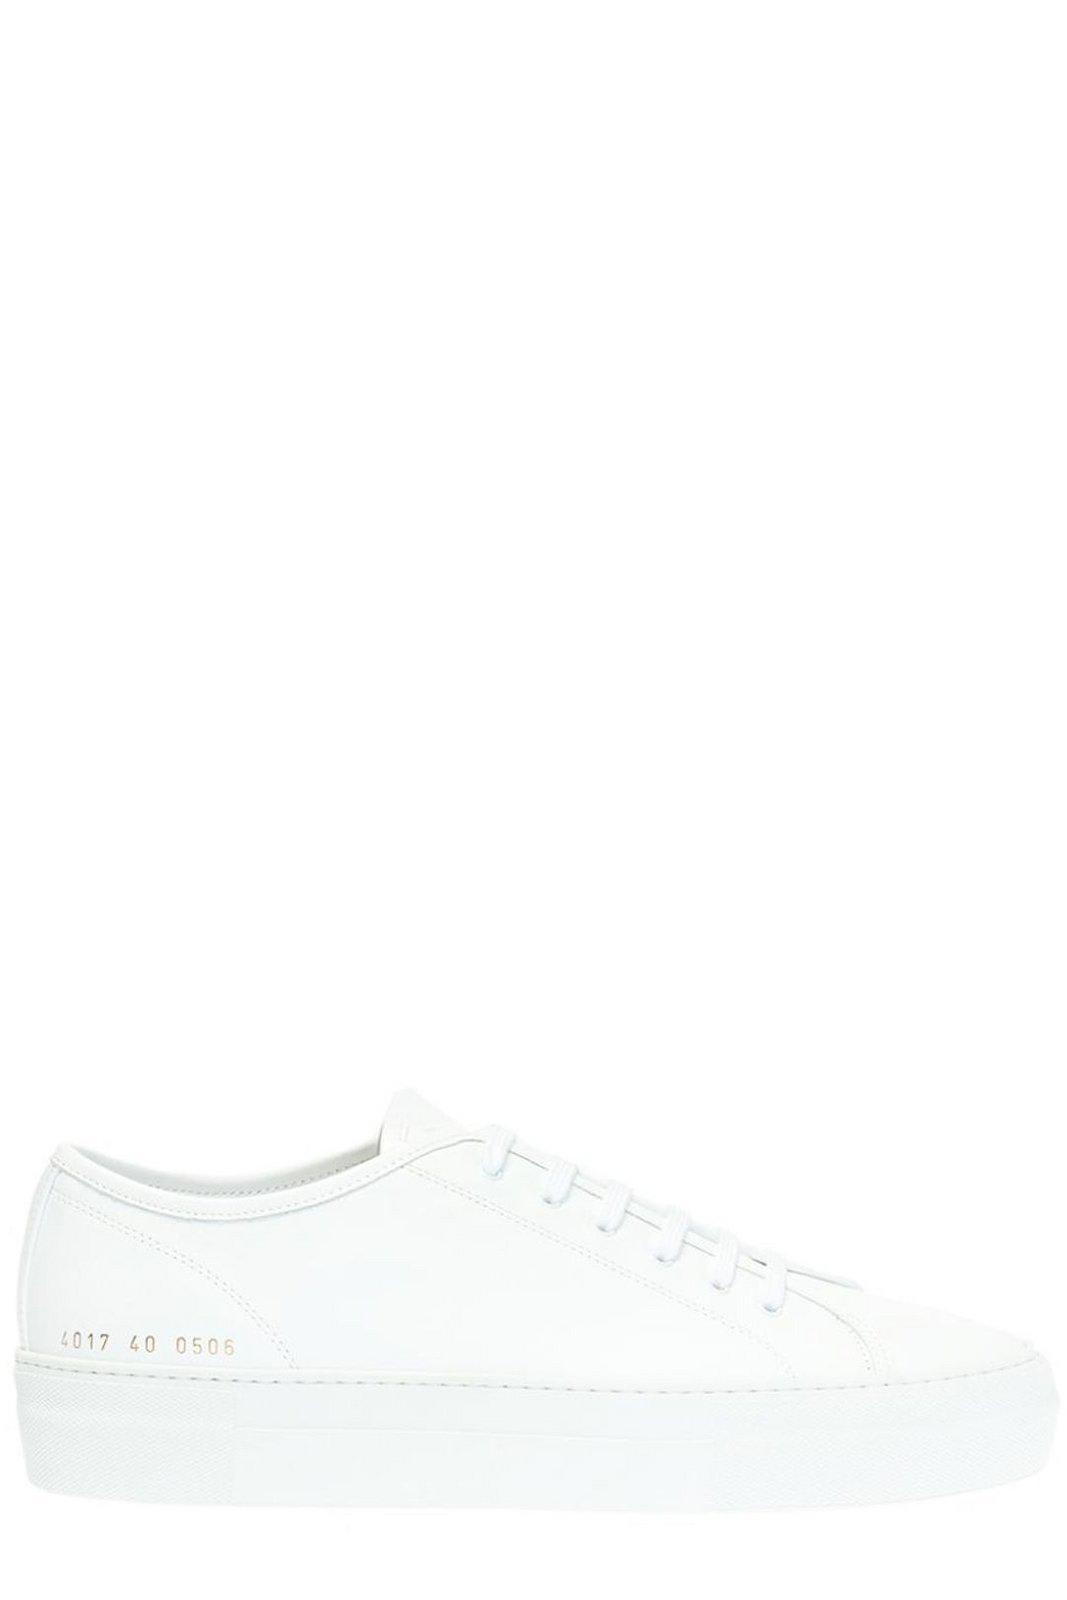 COMMON PROJECTS TOURNAMENT LOW-TOP SNEAKERS